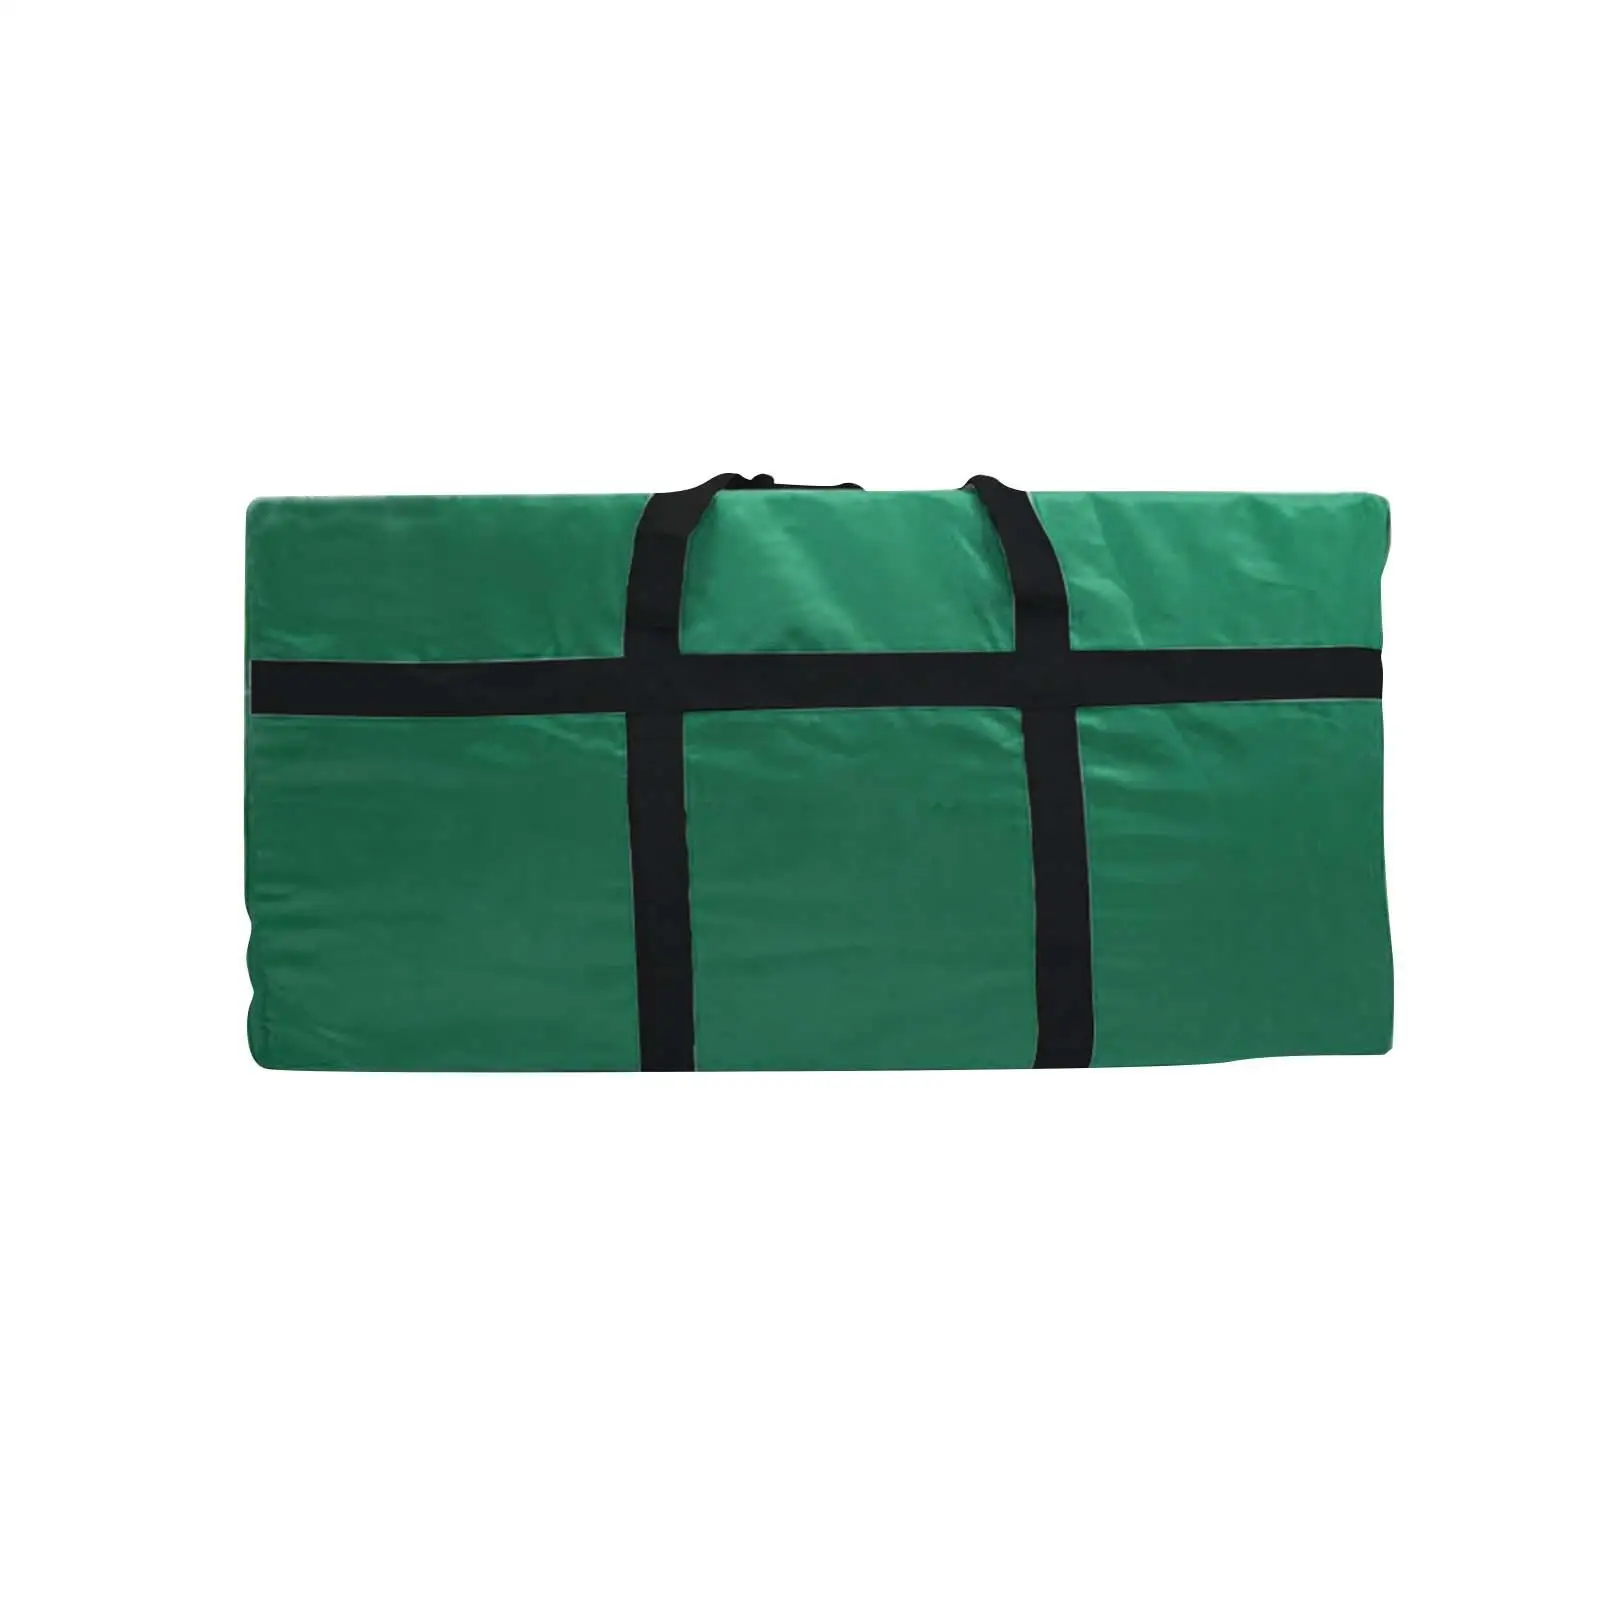 Camping Gear Storage Bags Pouch Large Capacity Bags for Camping Picnic Work